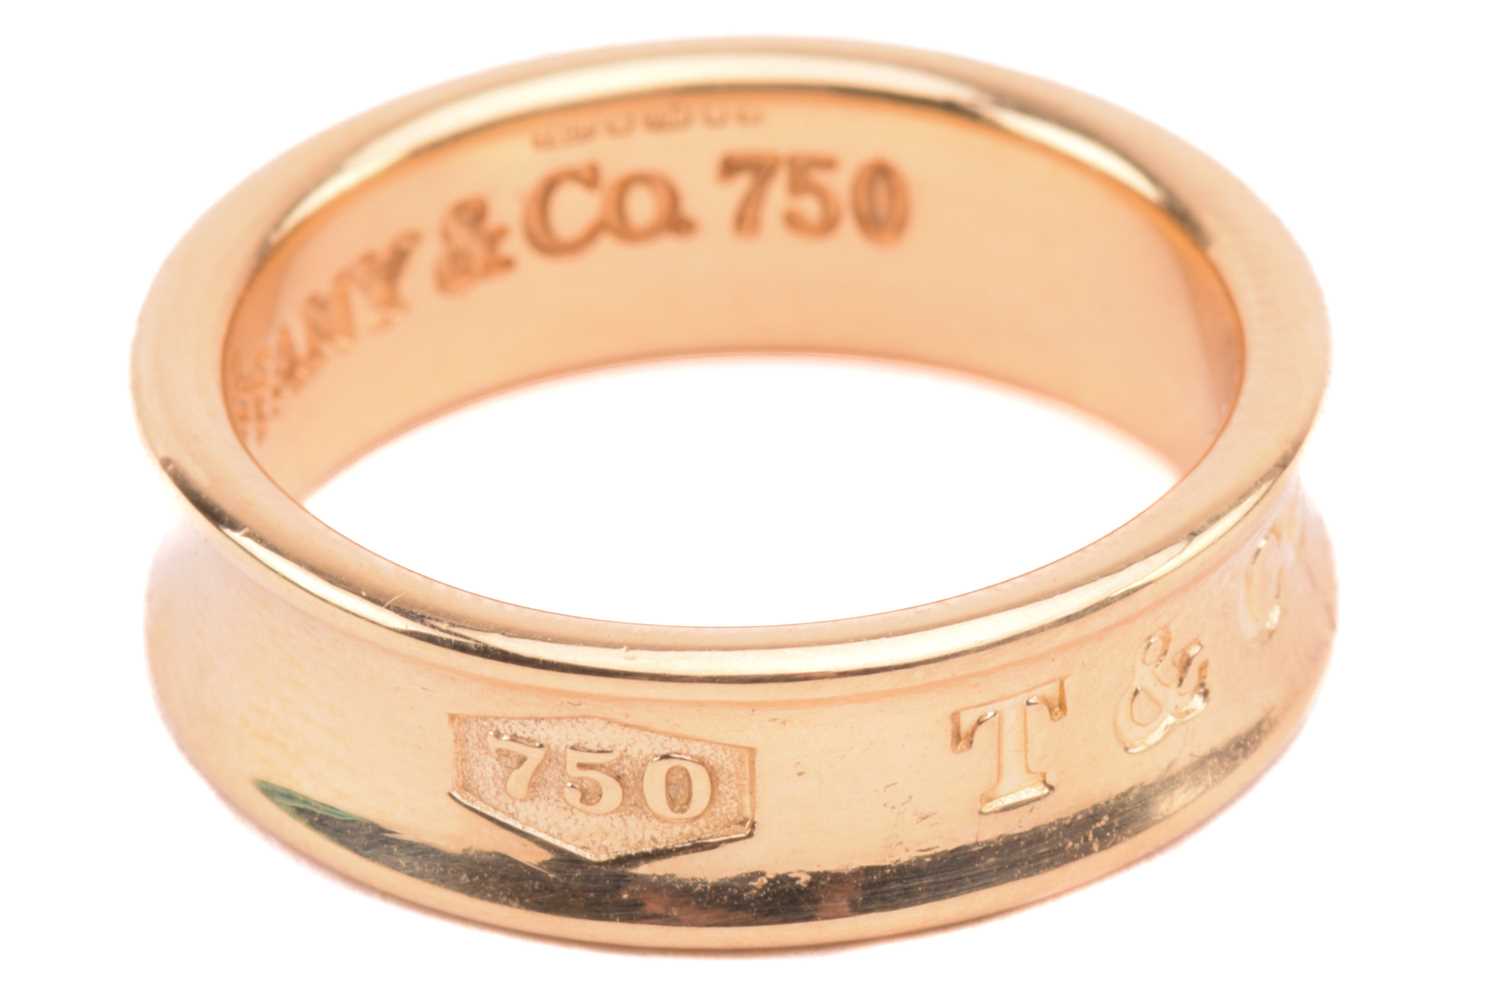 Tiffany & Co. - an 18ct yellow gold ring from the '1837' collection, the 6.1 mm wide concave band - Image 3 of 5